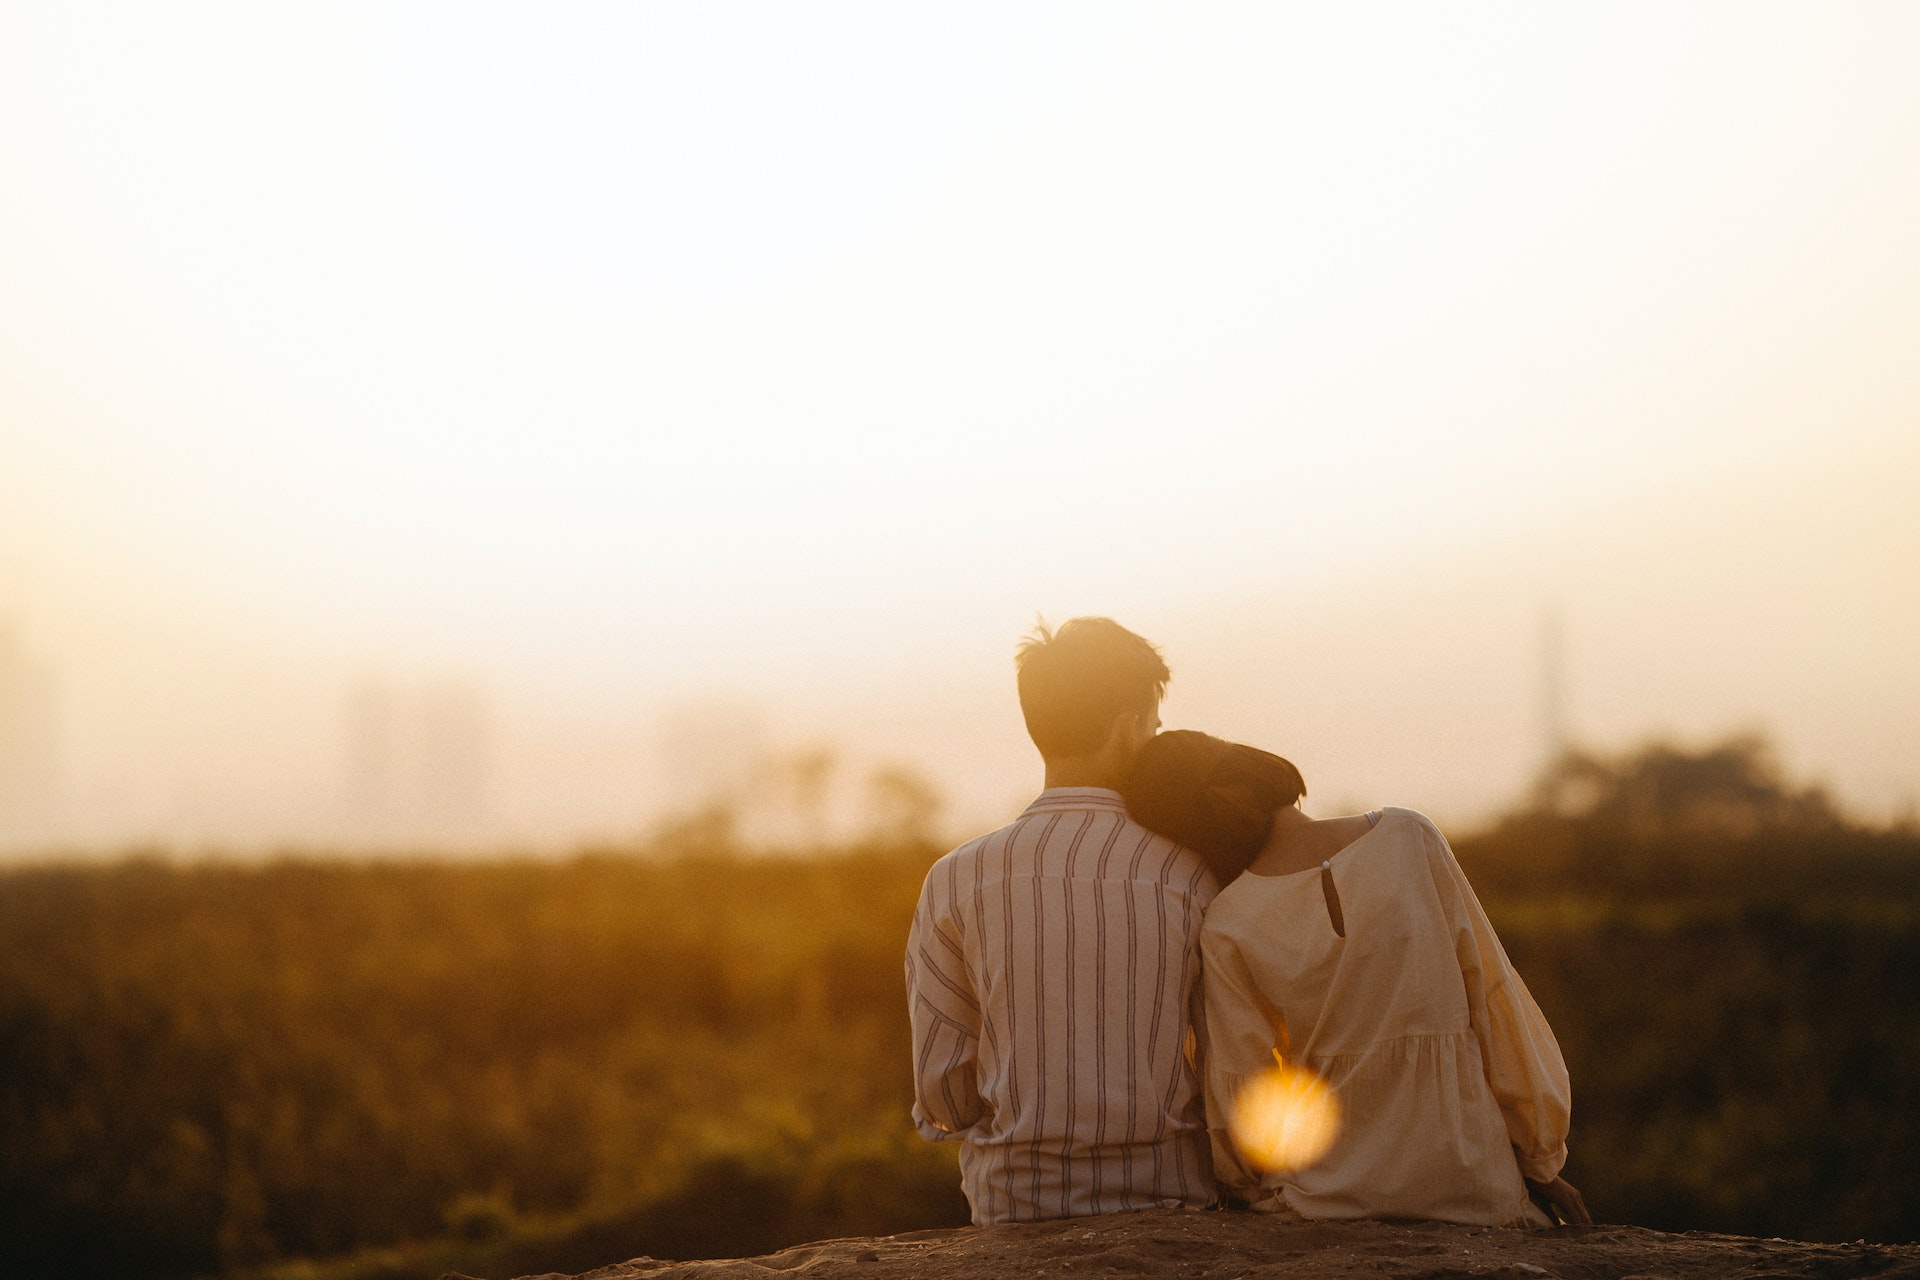 A man and woman sitting together | Source: Pexels